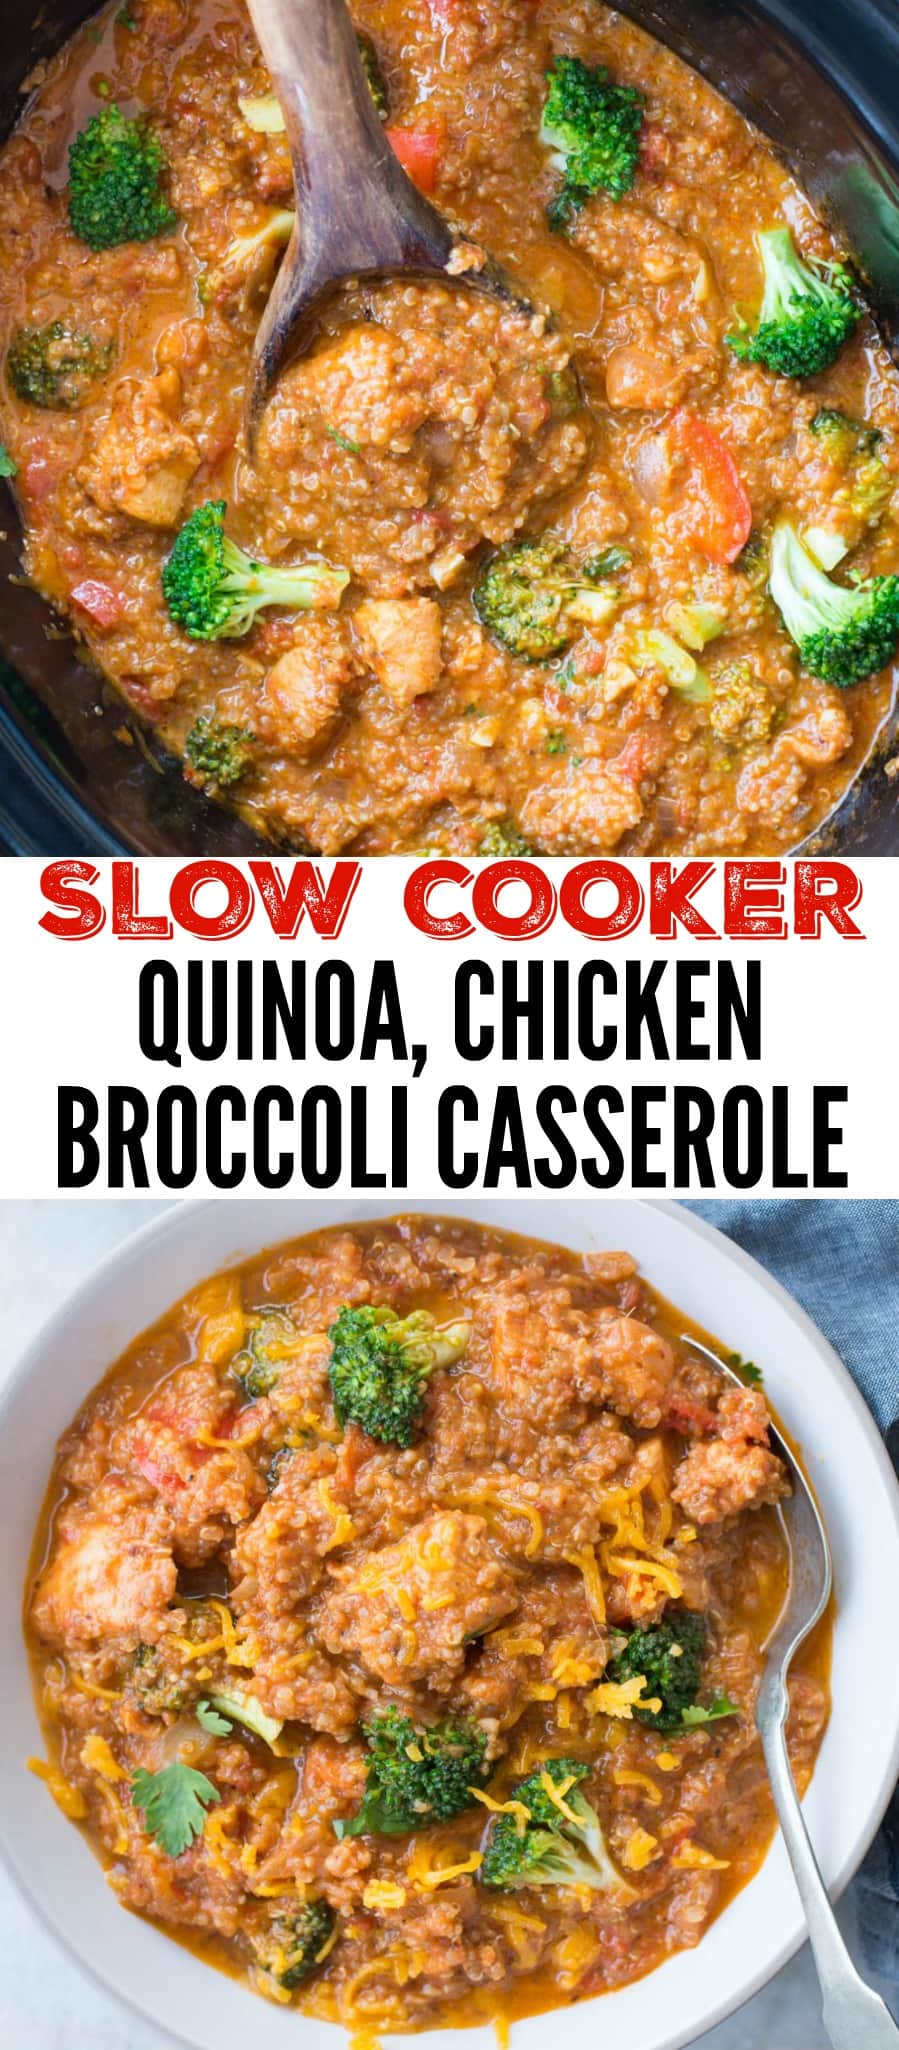 Quinoa Chicken Broccoli Casserole is an incredibly healthy meal that the whole family would love. Quinoa, Chicken, Broccoli topped with cheese cooked slowly in a slow cooker. 